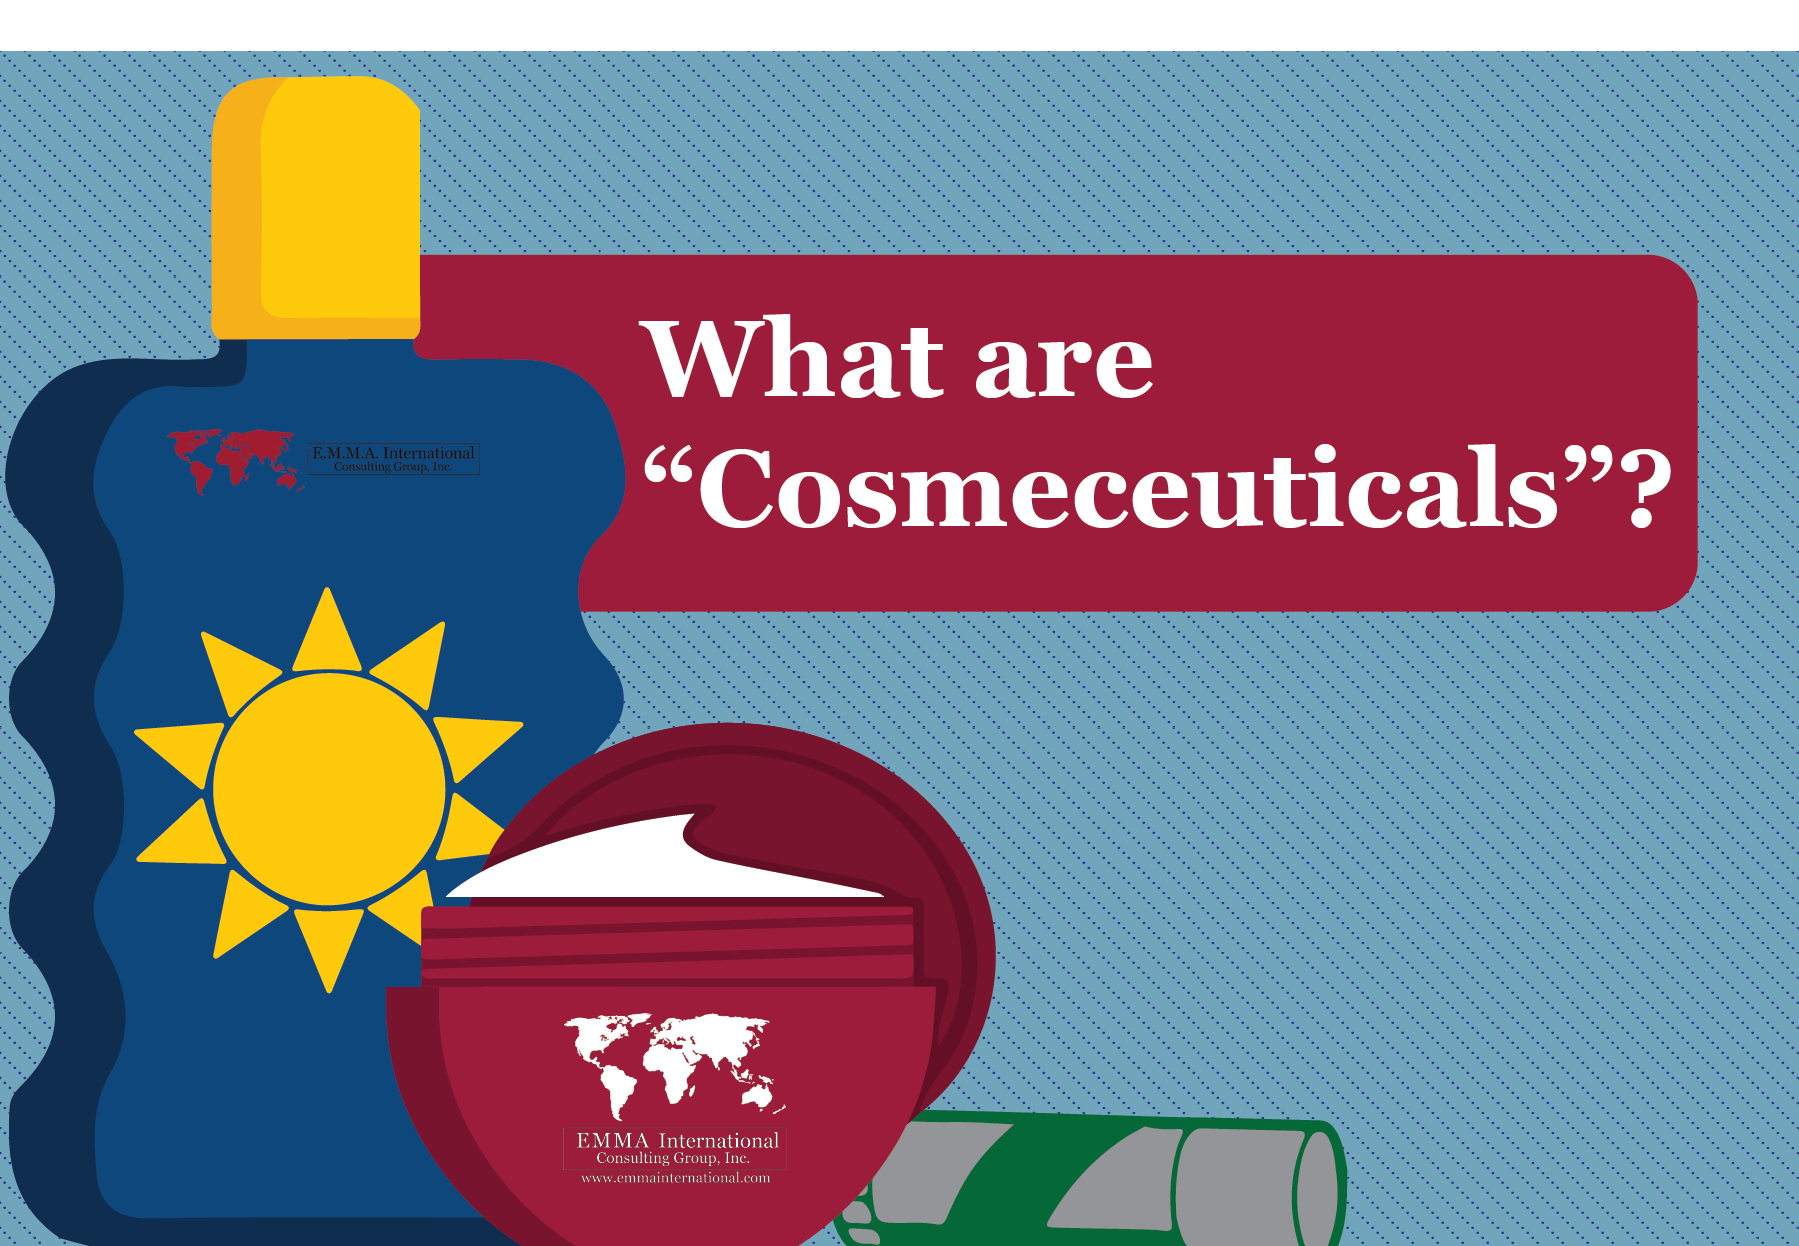 What are “Cosmeceuticals”?